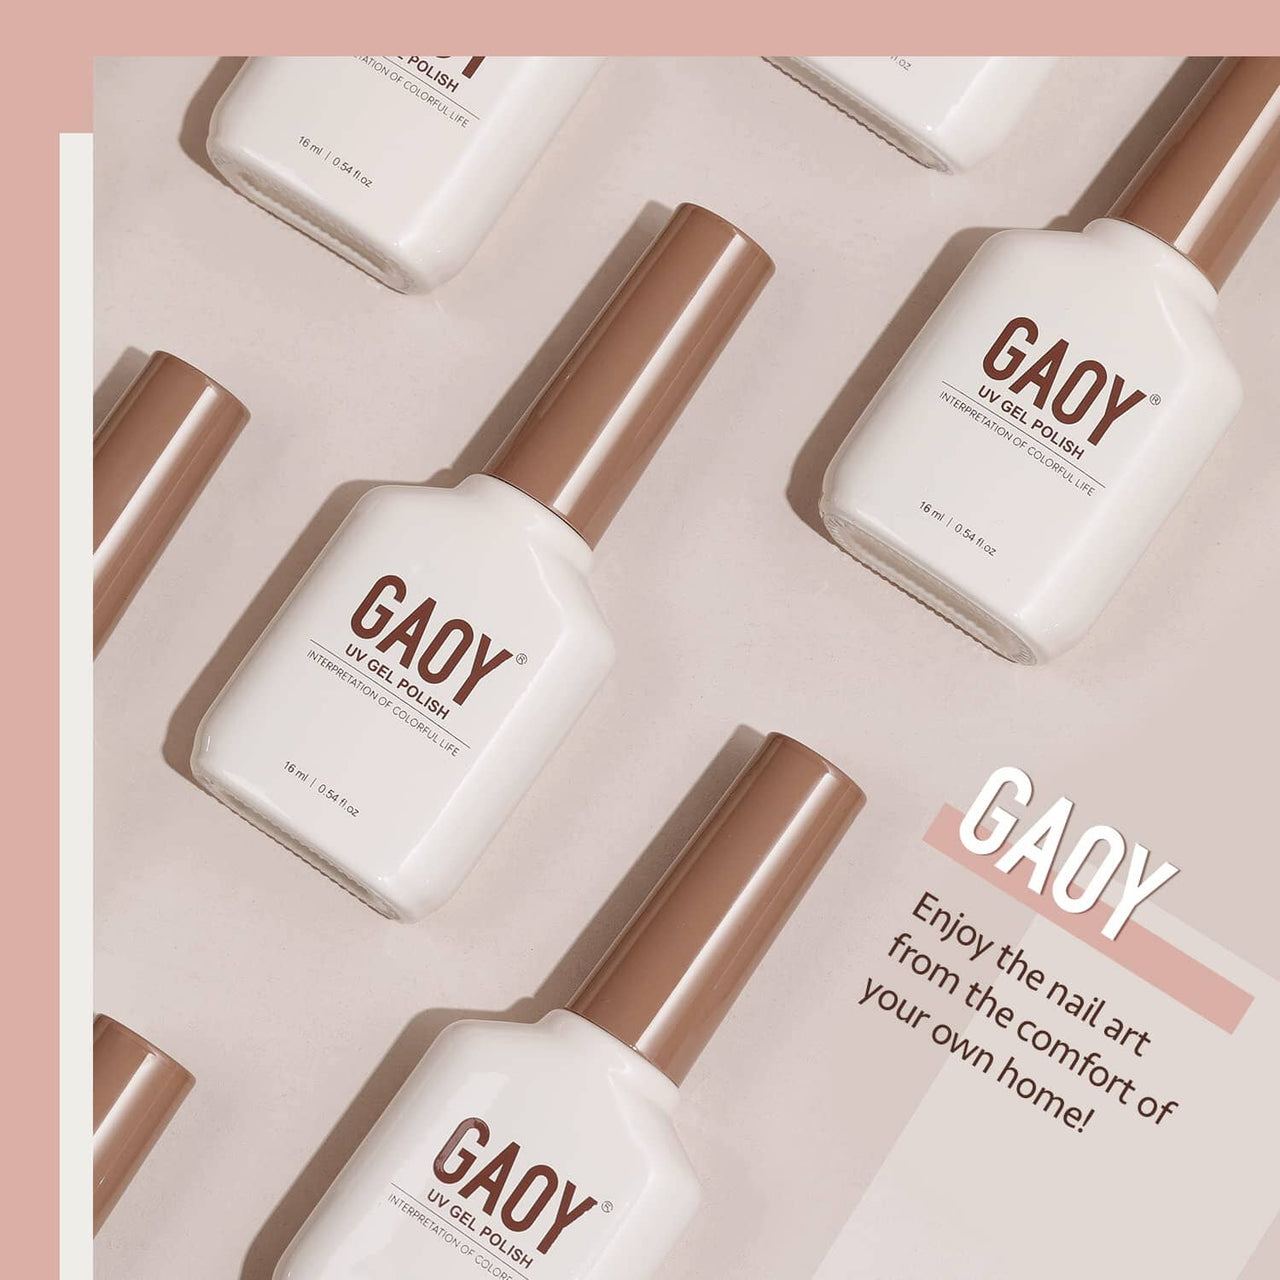 GAOY GAOY Sheer Light Pink Gel Nail Polish, 16ml Jelly Milky White Peach Translucent Color 1352 UV Light Cure Gel Polish for Nail Art DIY Manicure and Pedicure at Home